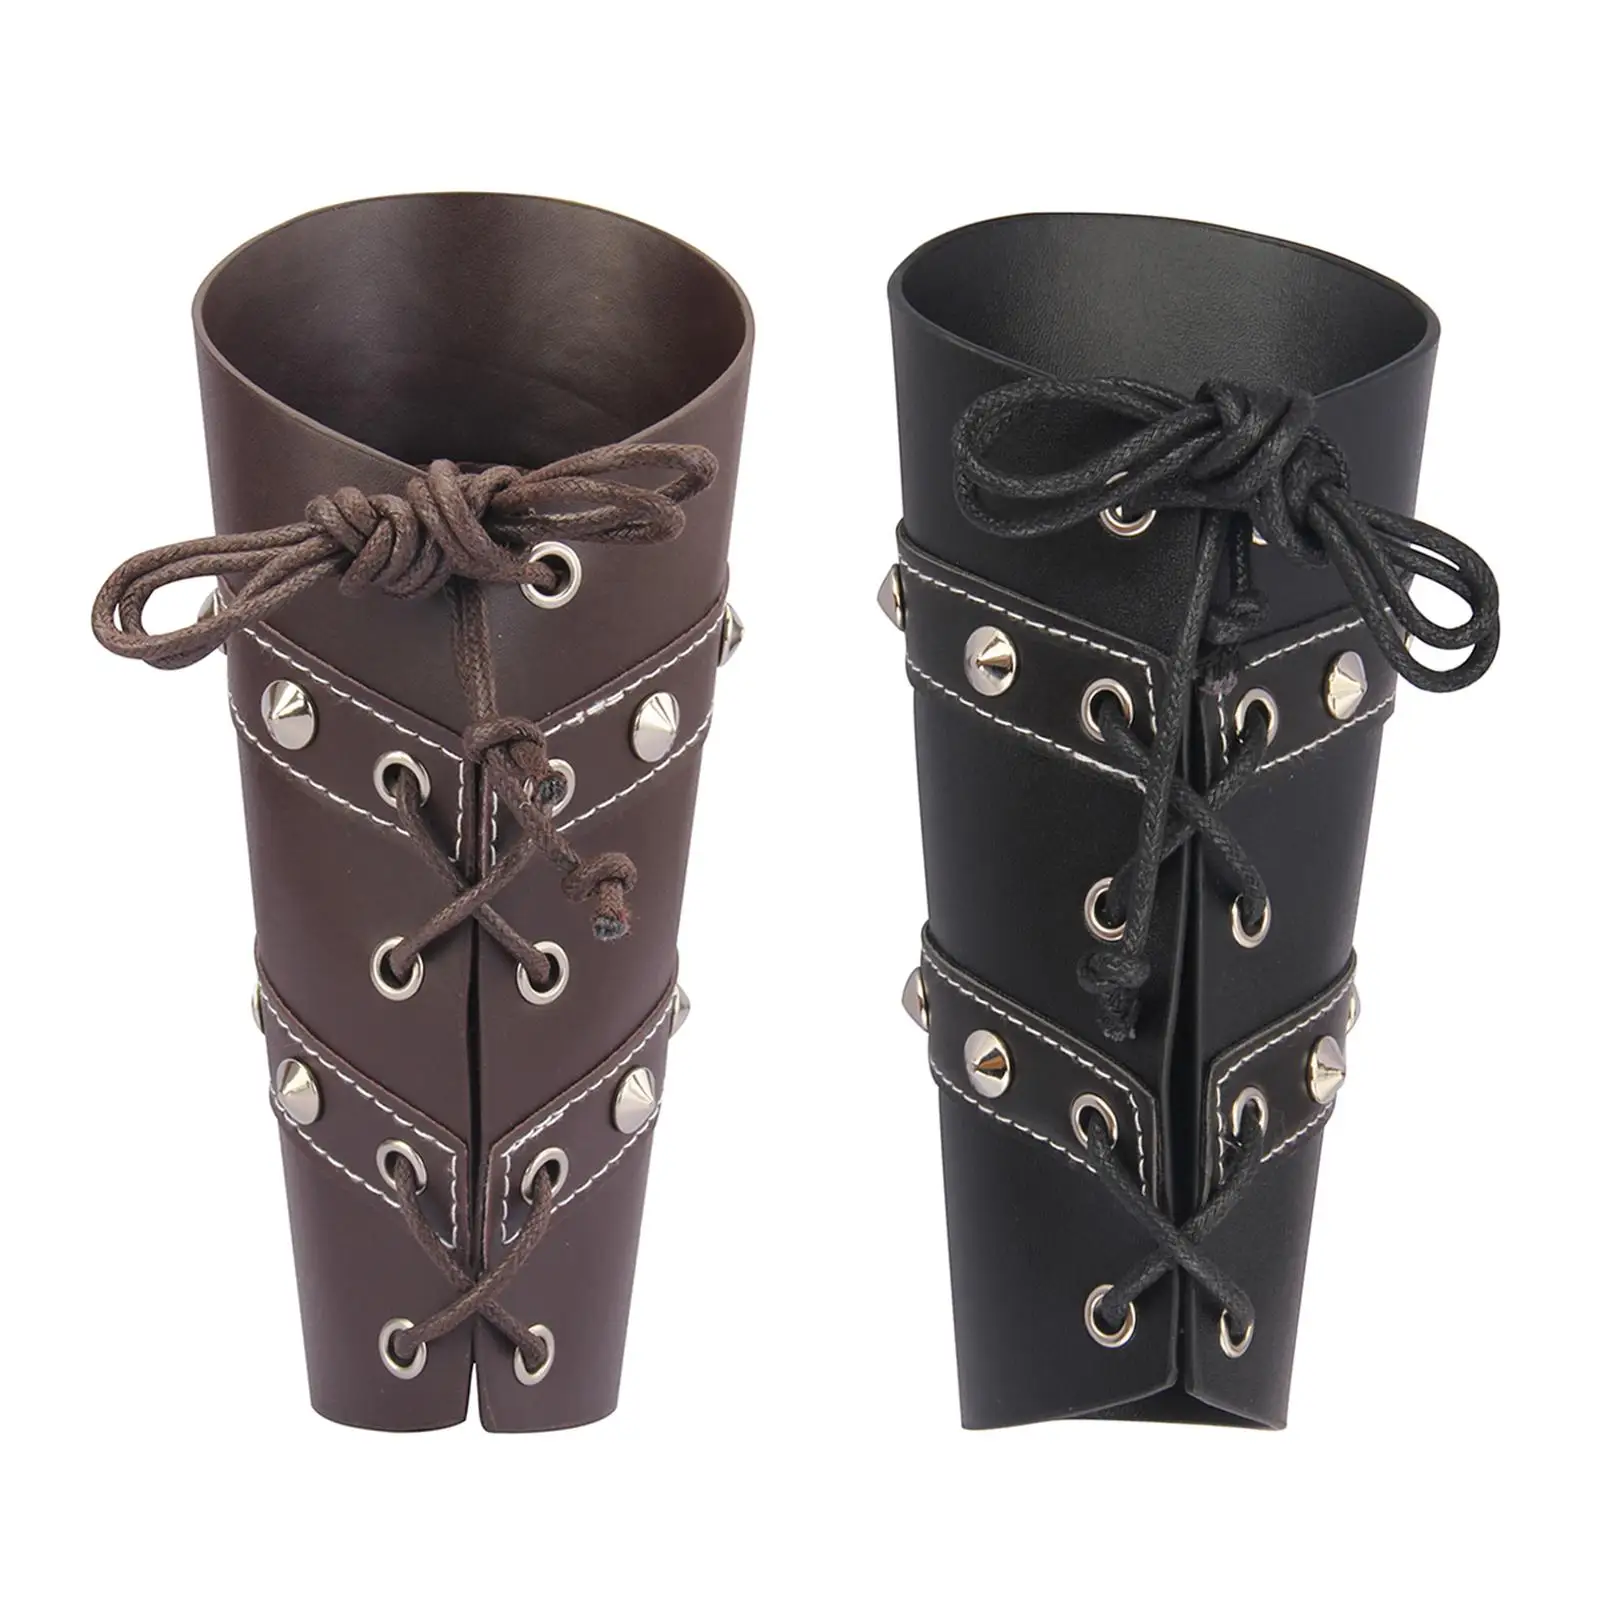 PU Leather Arm Cuff Gothic Medieval Arm Guards Protection for Men Women Role Playing Weddings Halloween Party Graduations